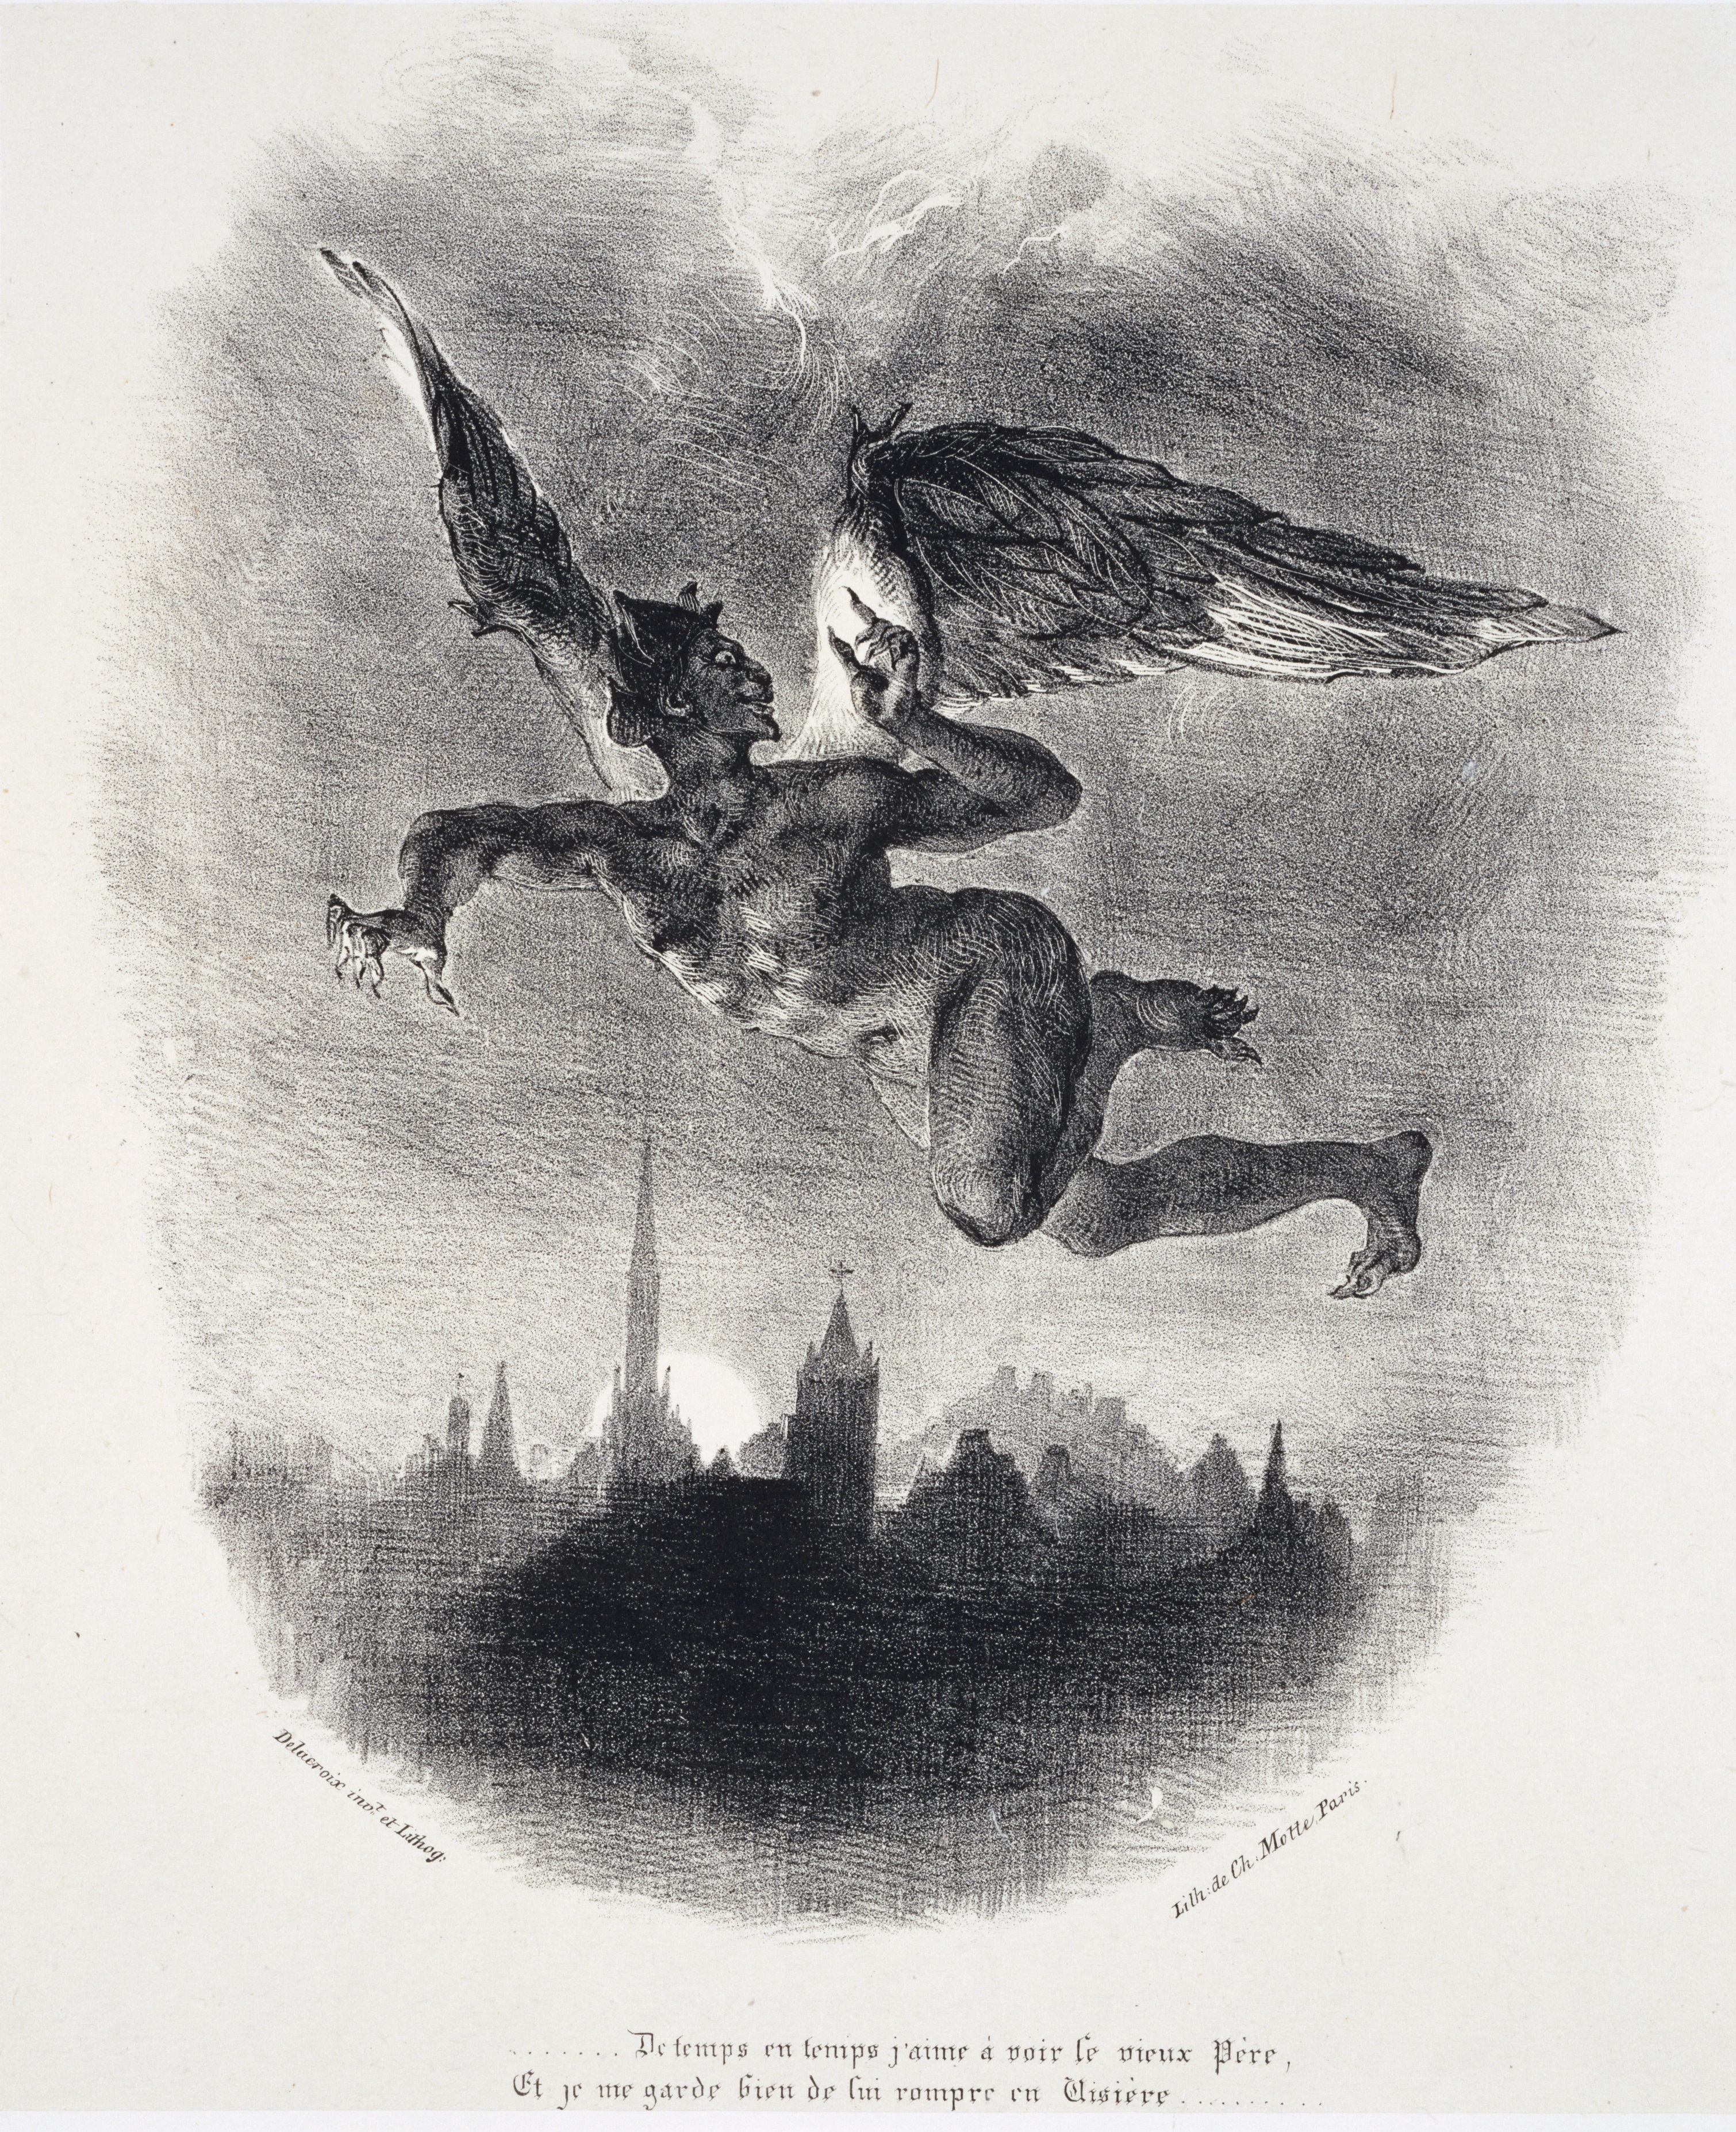 image: Mephistopheles Aloft from the series ‘Faust’